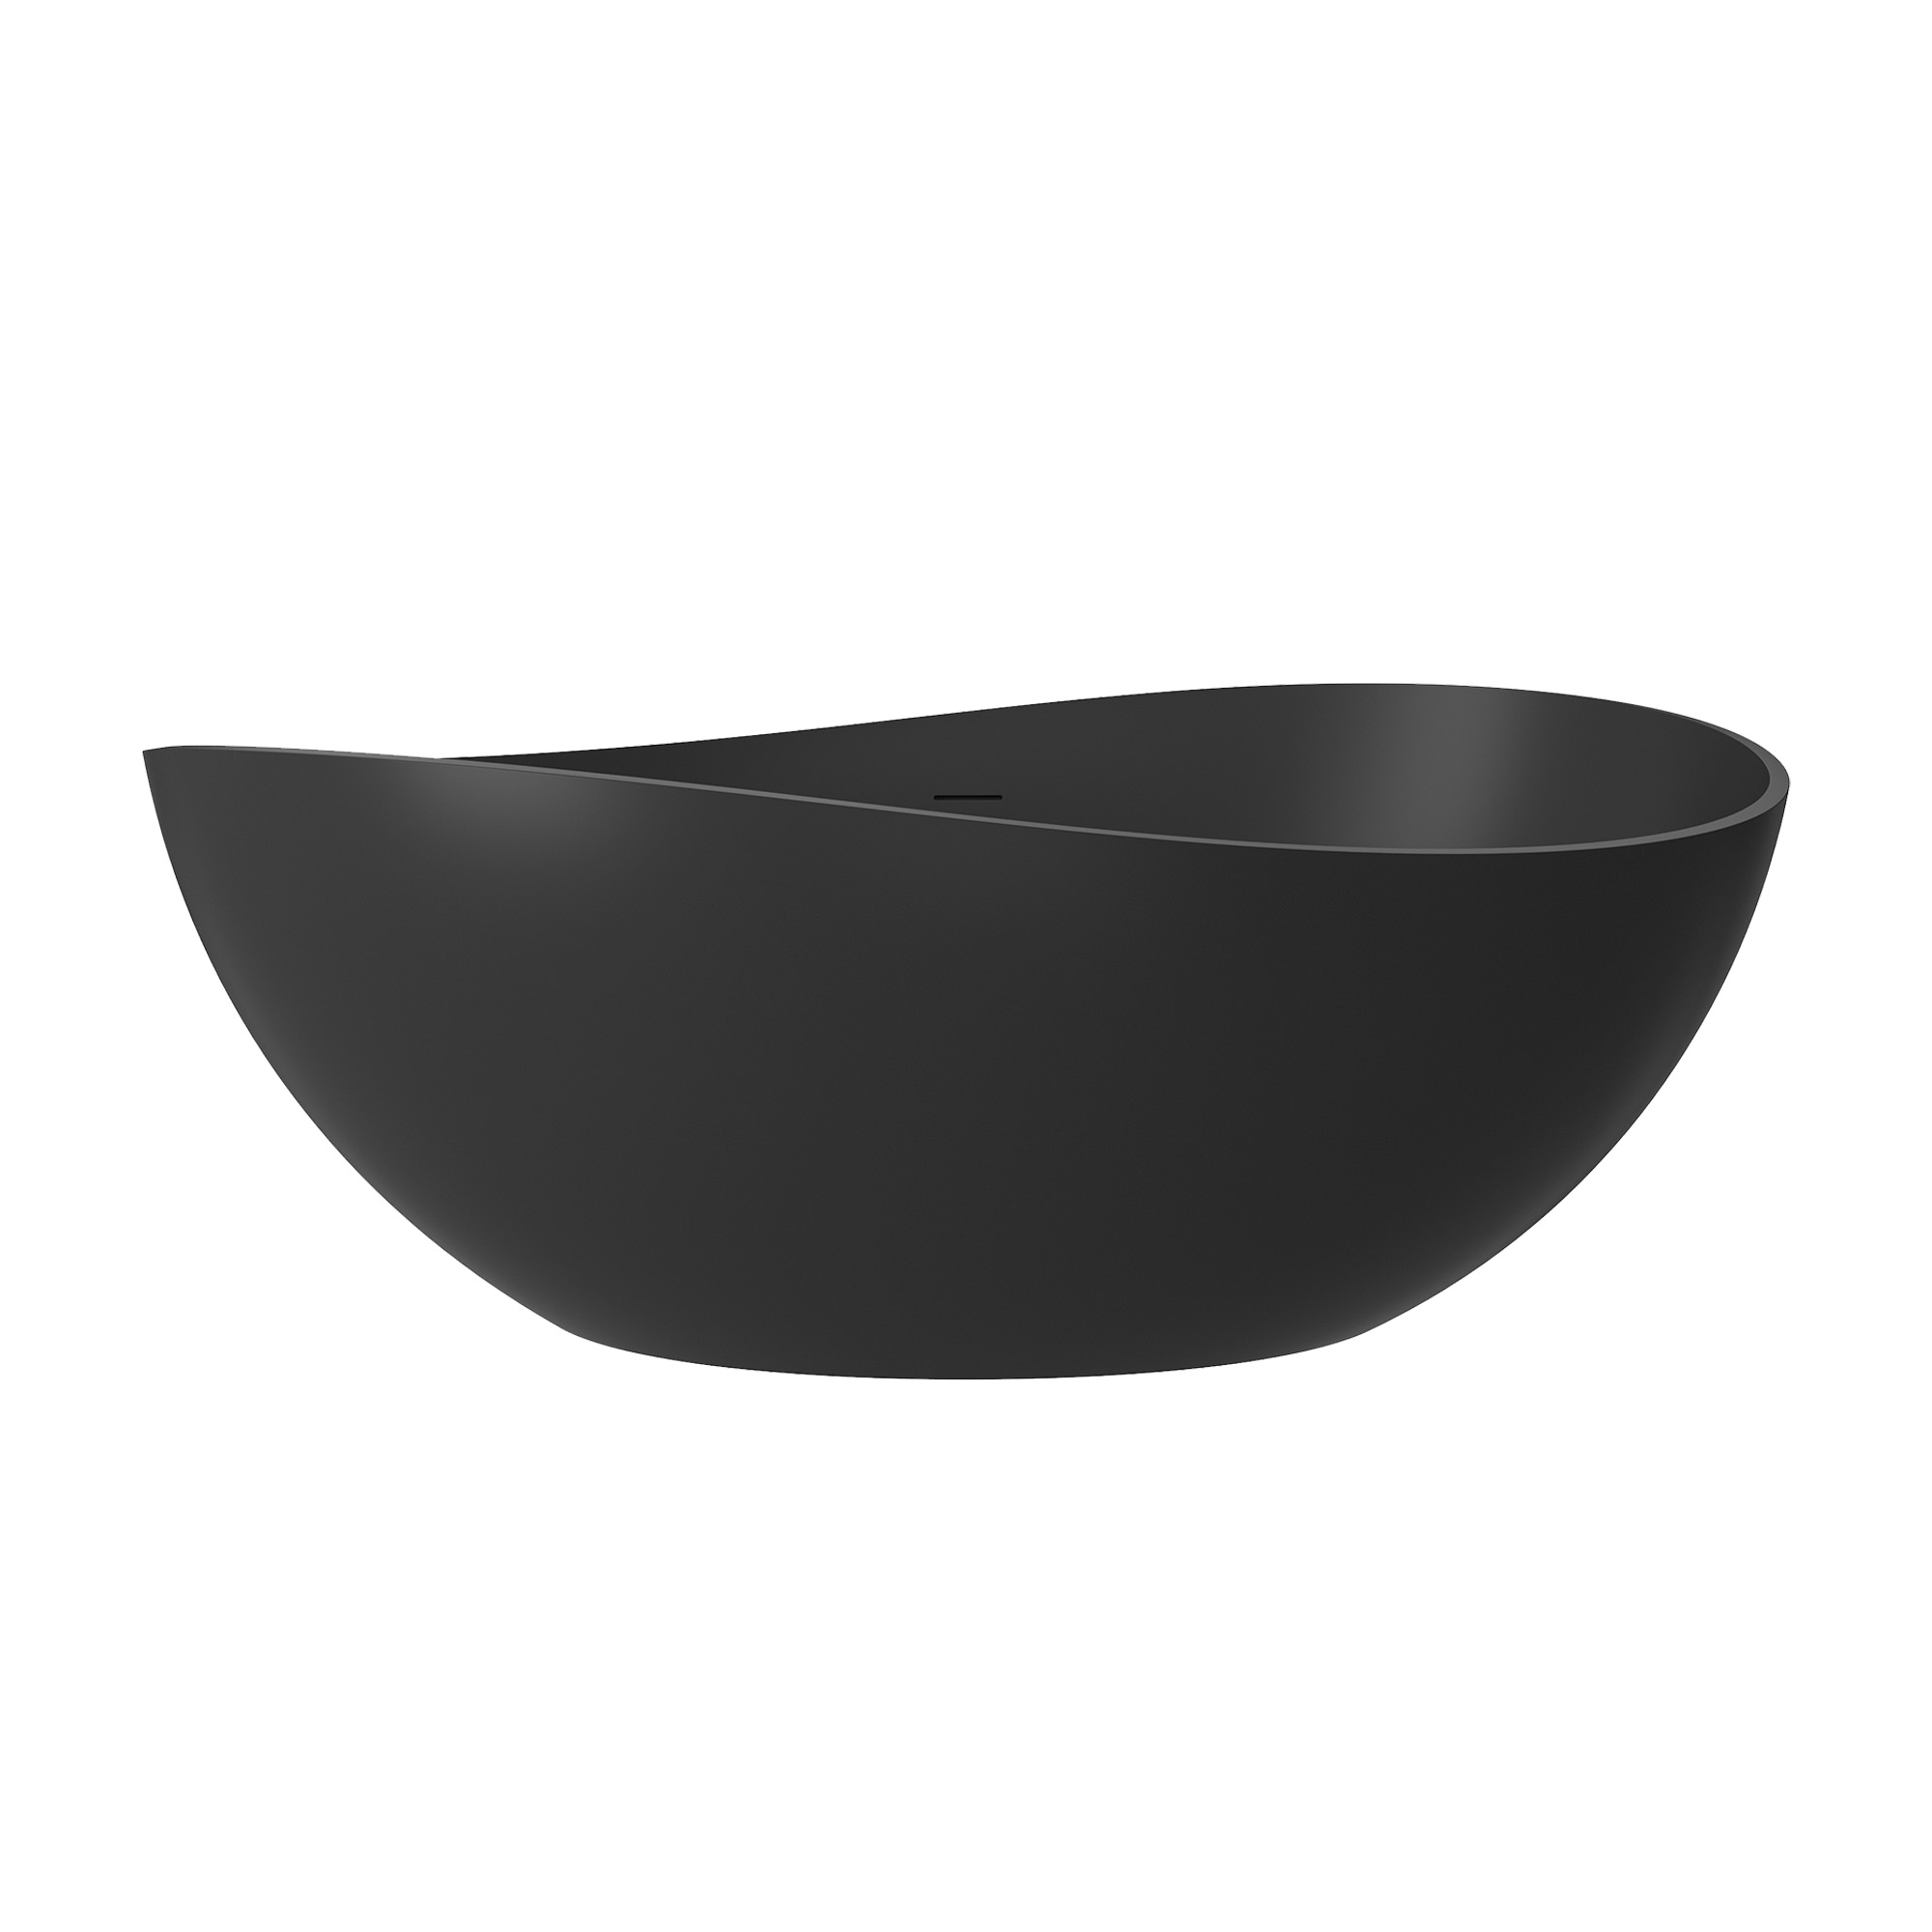 63" Solid Surface Freestanding Bathtub in Two Colors Options(MatteBlack&Grey), Stone Resin, Well-Design for Resin Bathtubs, Unique Stand-Alone Tubs – Resistant to Discoloration